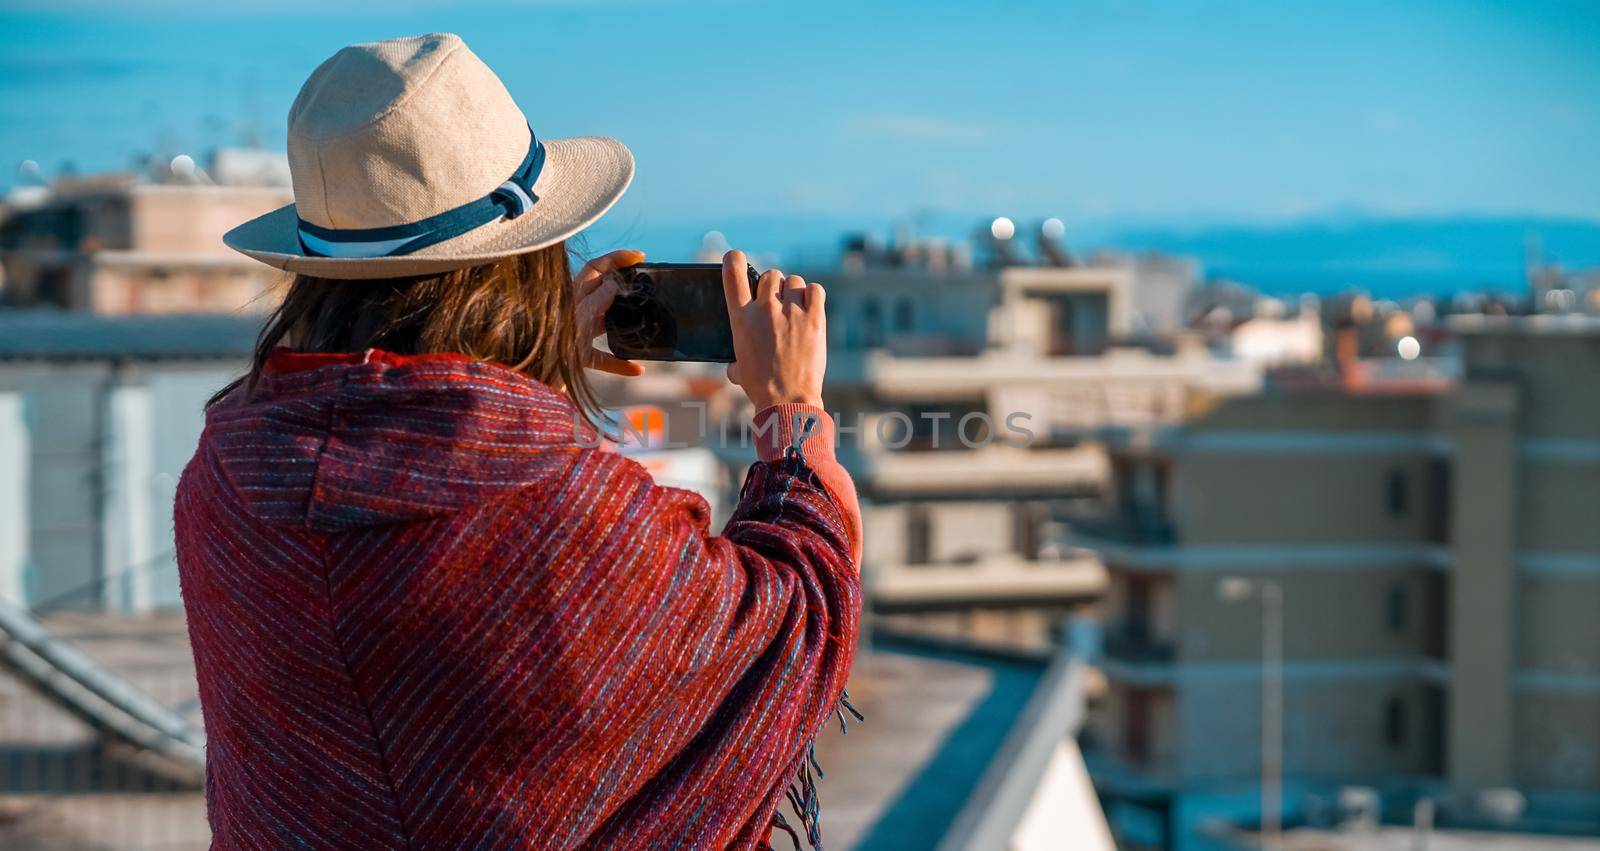 A young girl in a burgundy poncho and a hat travels and takes a photo with a cityscape on a sunny day.